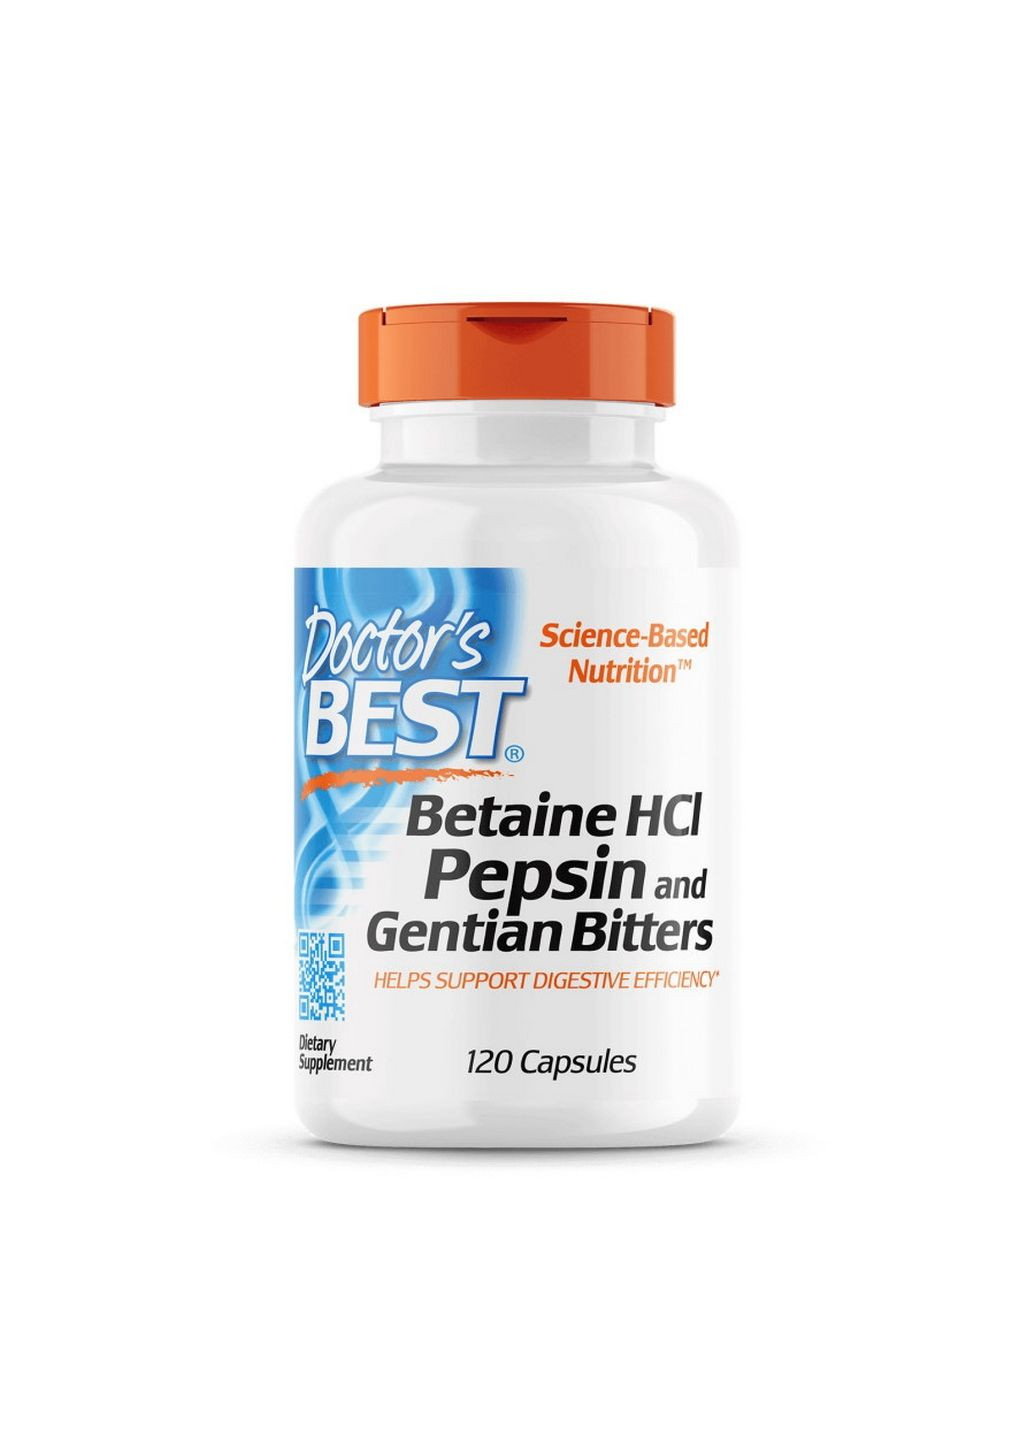 Натуральная добавка Betaine HCL Pepsin and Gentian Bitters, 120 капсул Doctor's Best (293416639)